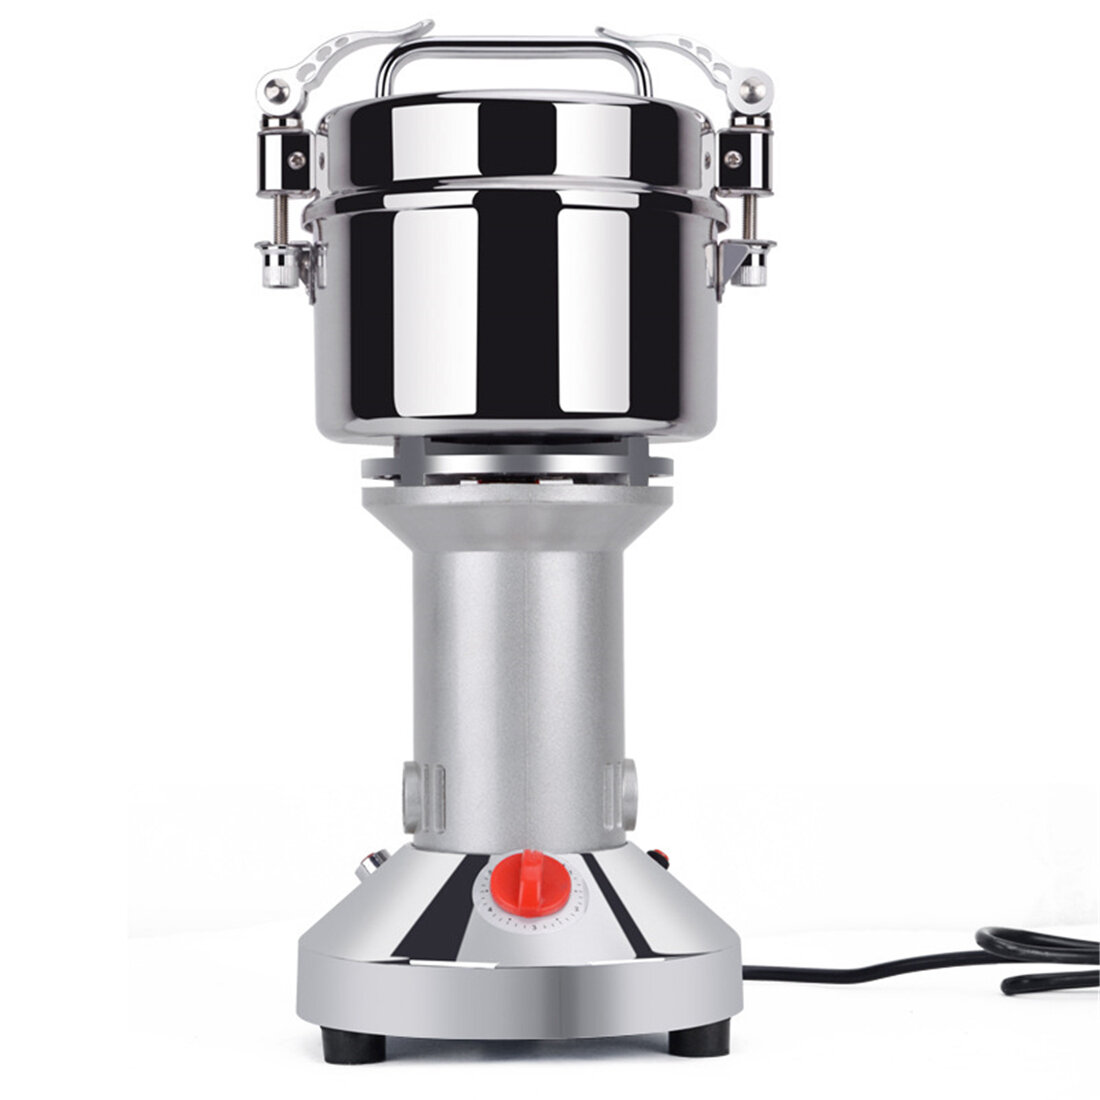 750g Commercial Spice Grinder Electric Grain Mill Grinder 2600W High Speed  Pulverizer, Stainless